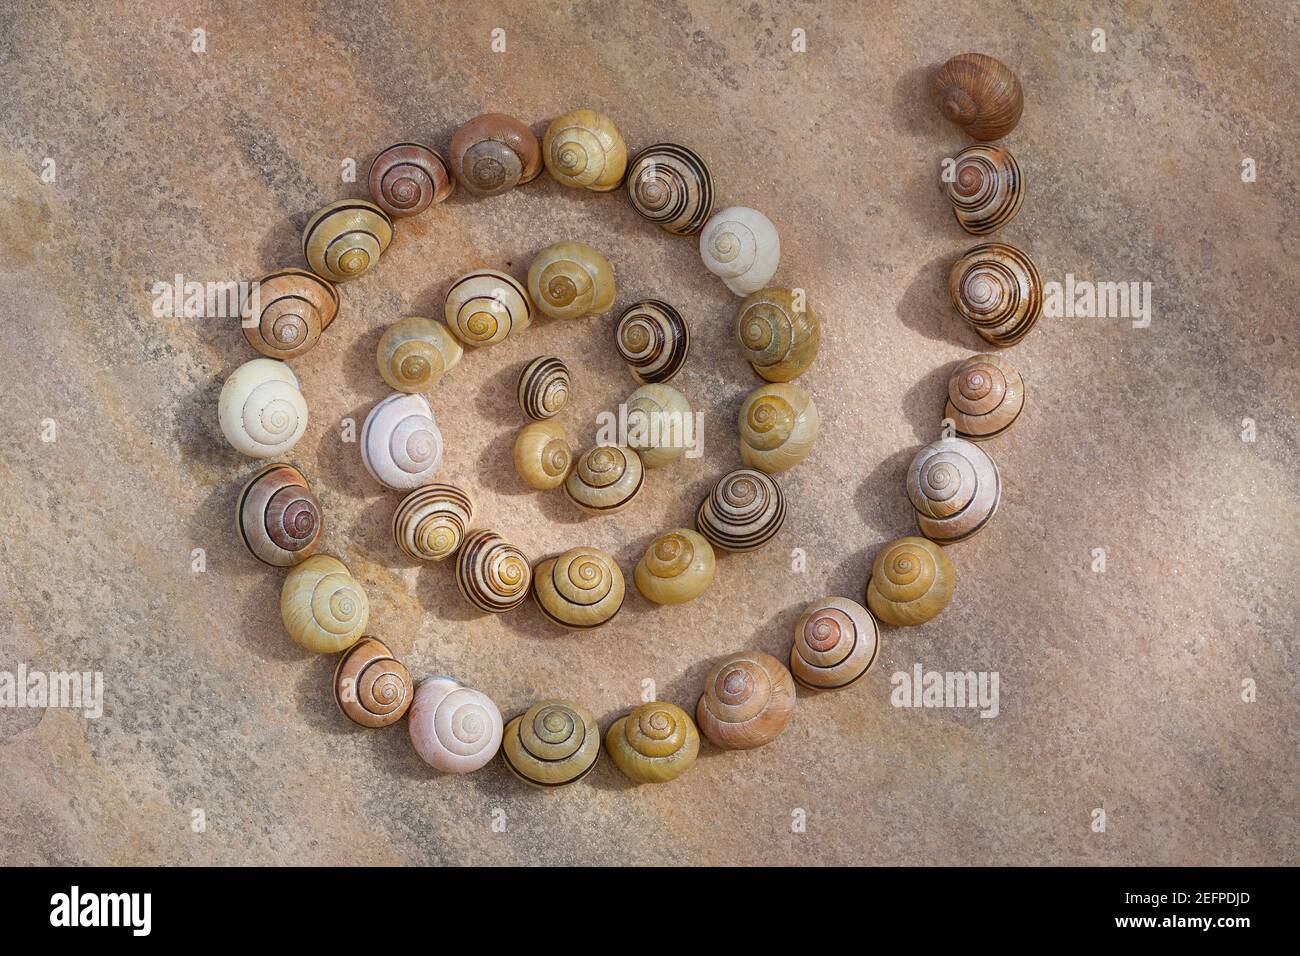 A spiral made of snail shells on stone background Stock Photo